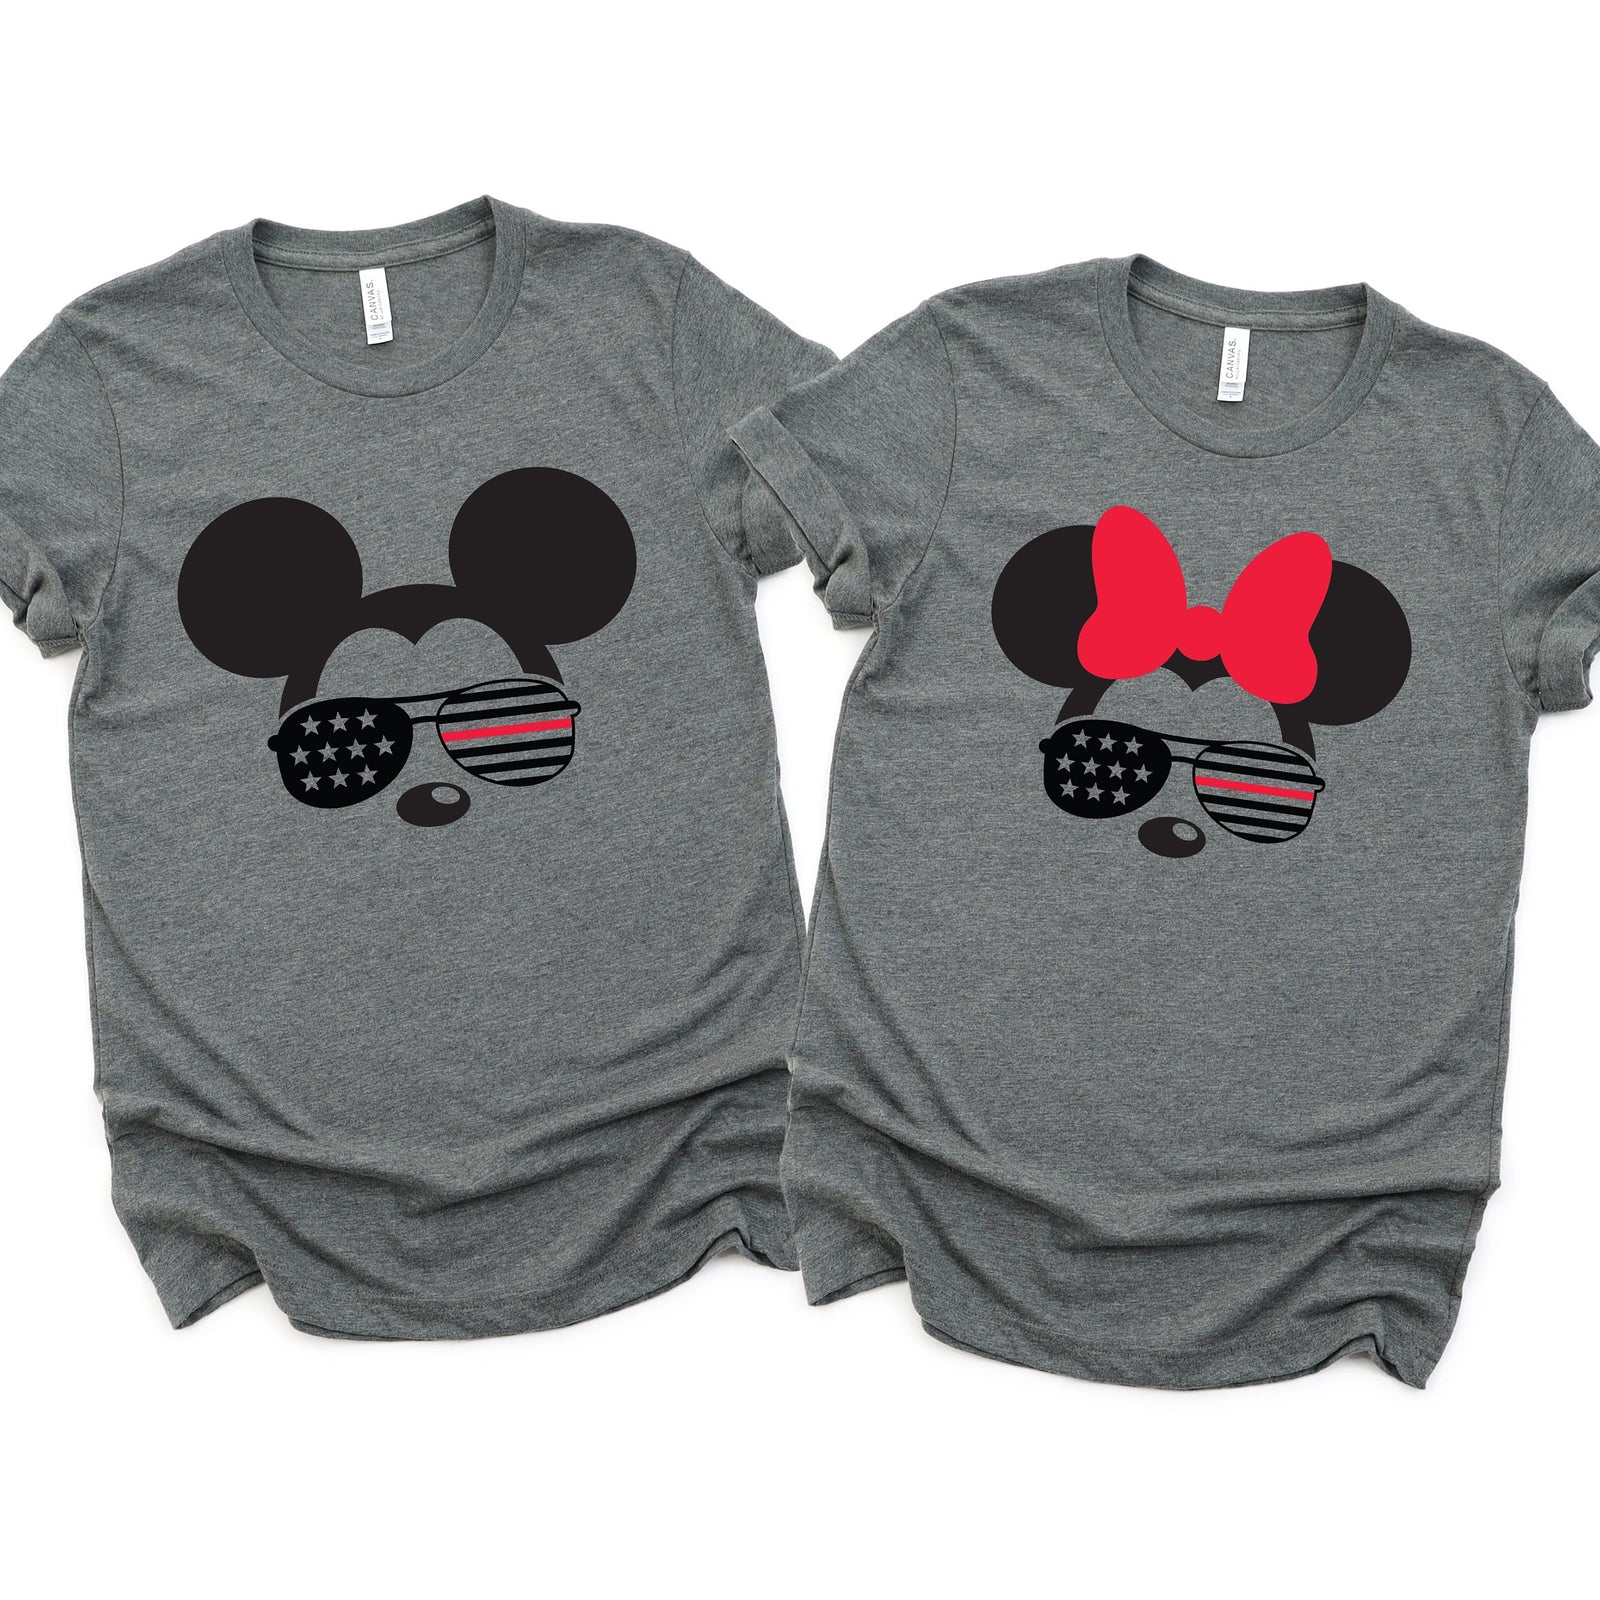 Fire Fighter Minnie and Mickey Adult Shirts - Disney Couples Matching Shirt - Red Line Flag -  Red Stripe - Stars and Stripes Sunglasses